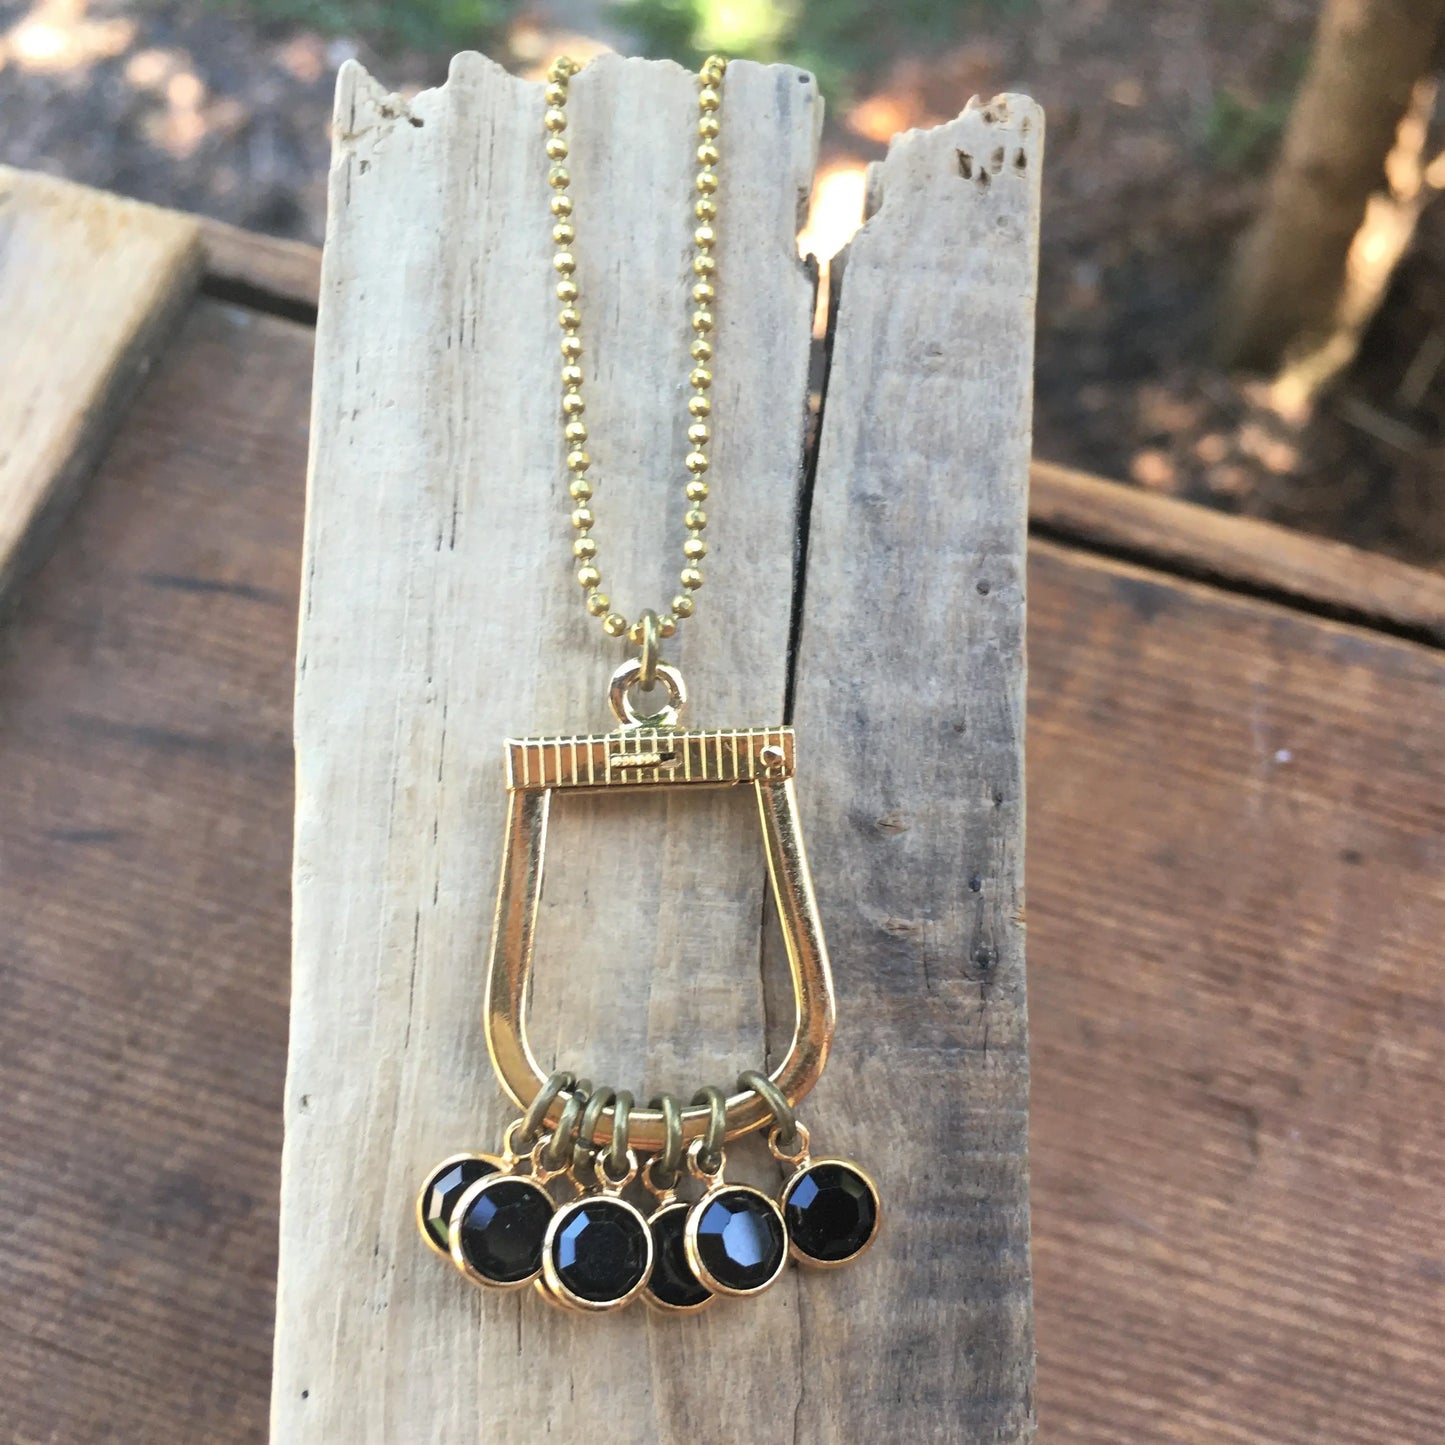 Repurposed Keychain Gold & Black Crystal Necklace